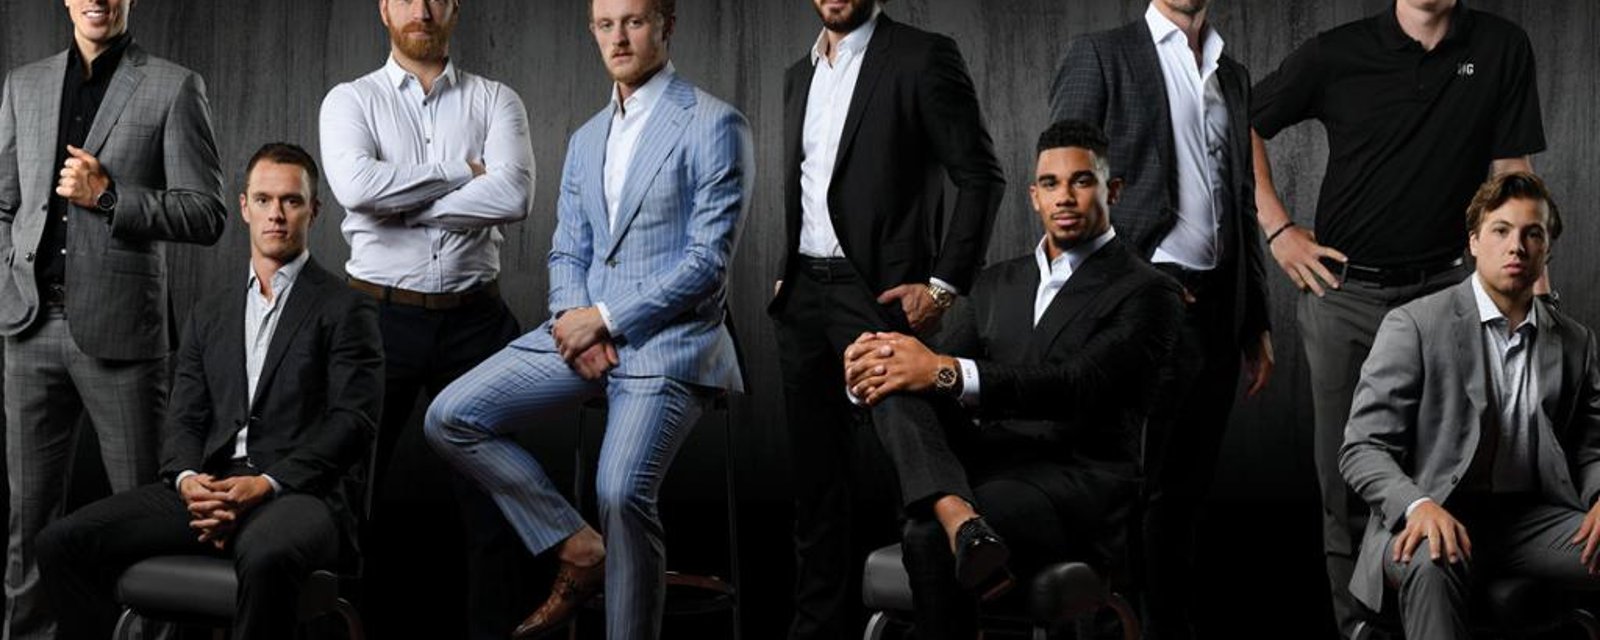 Huge controversy over players’ dress code after Wild revealed team attire 